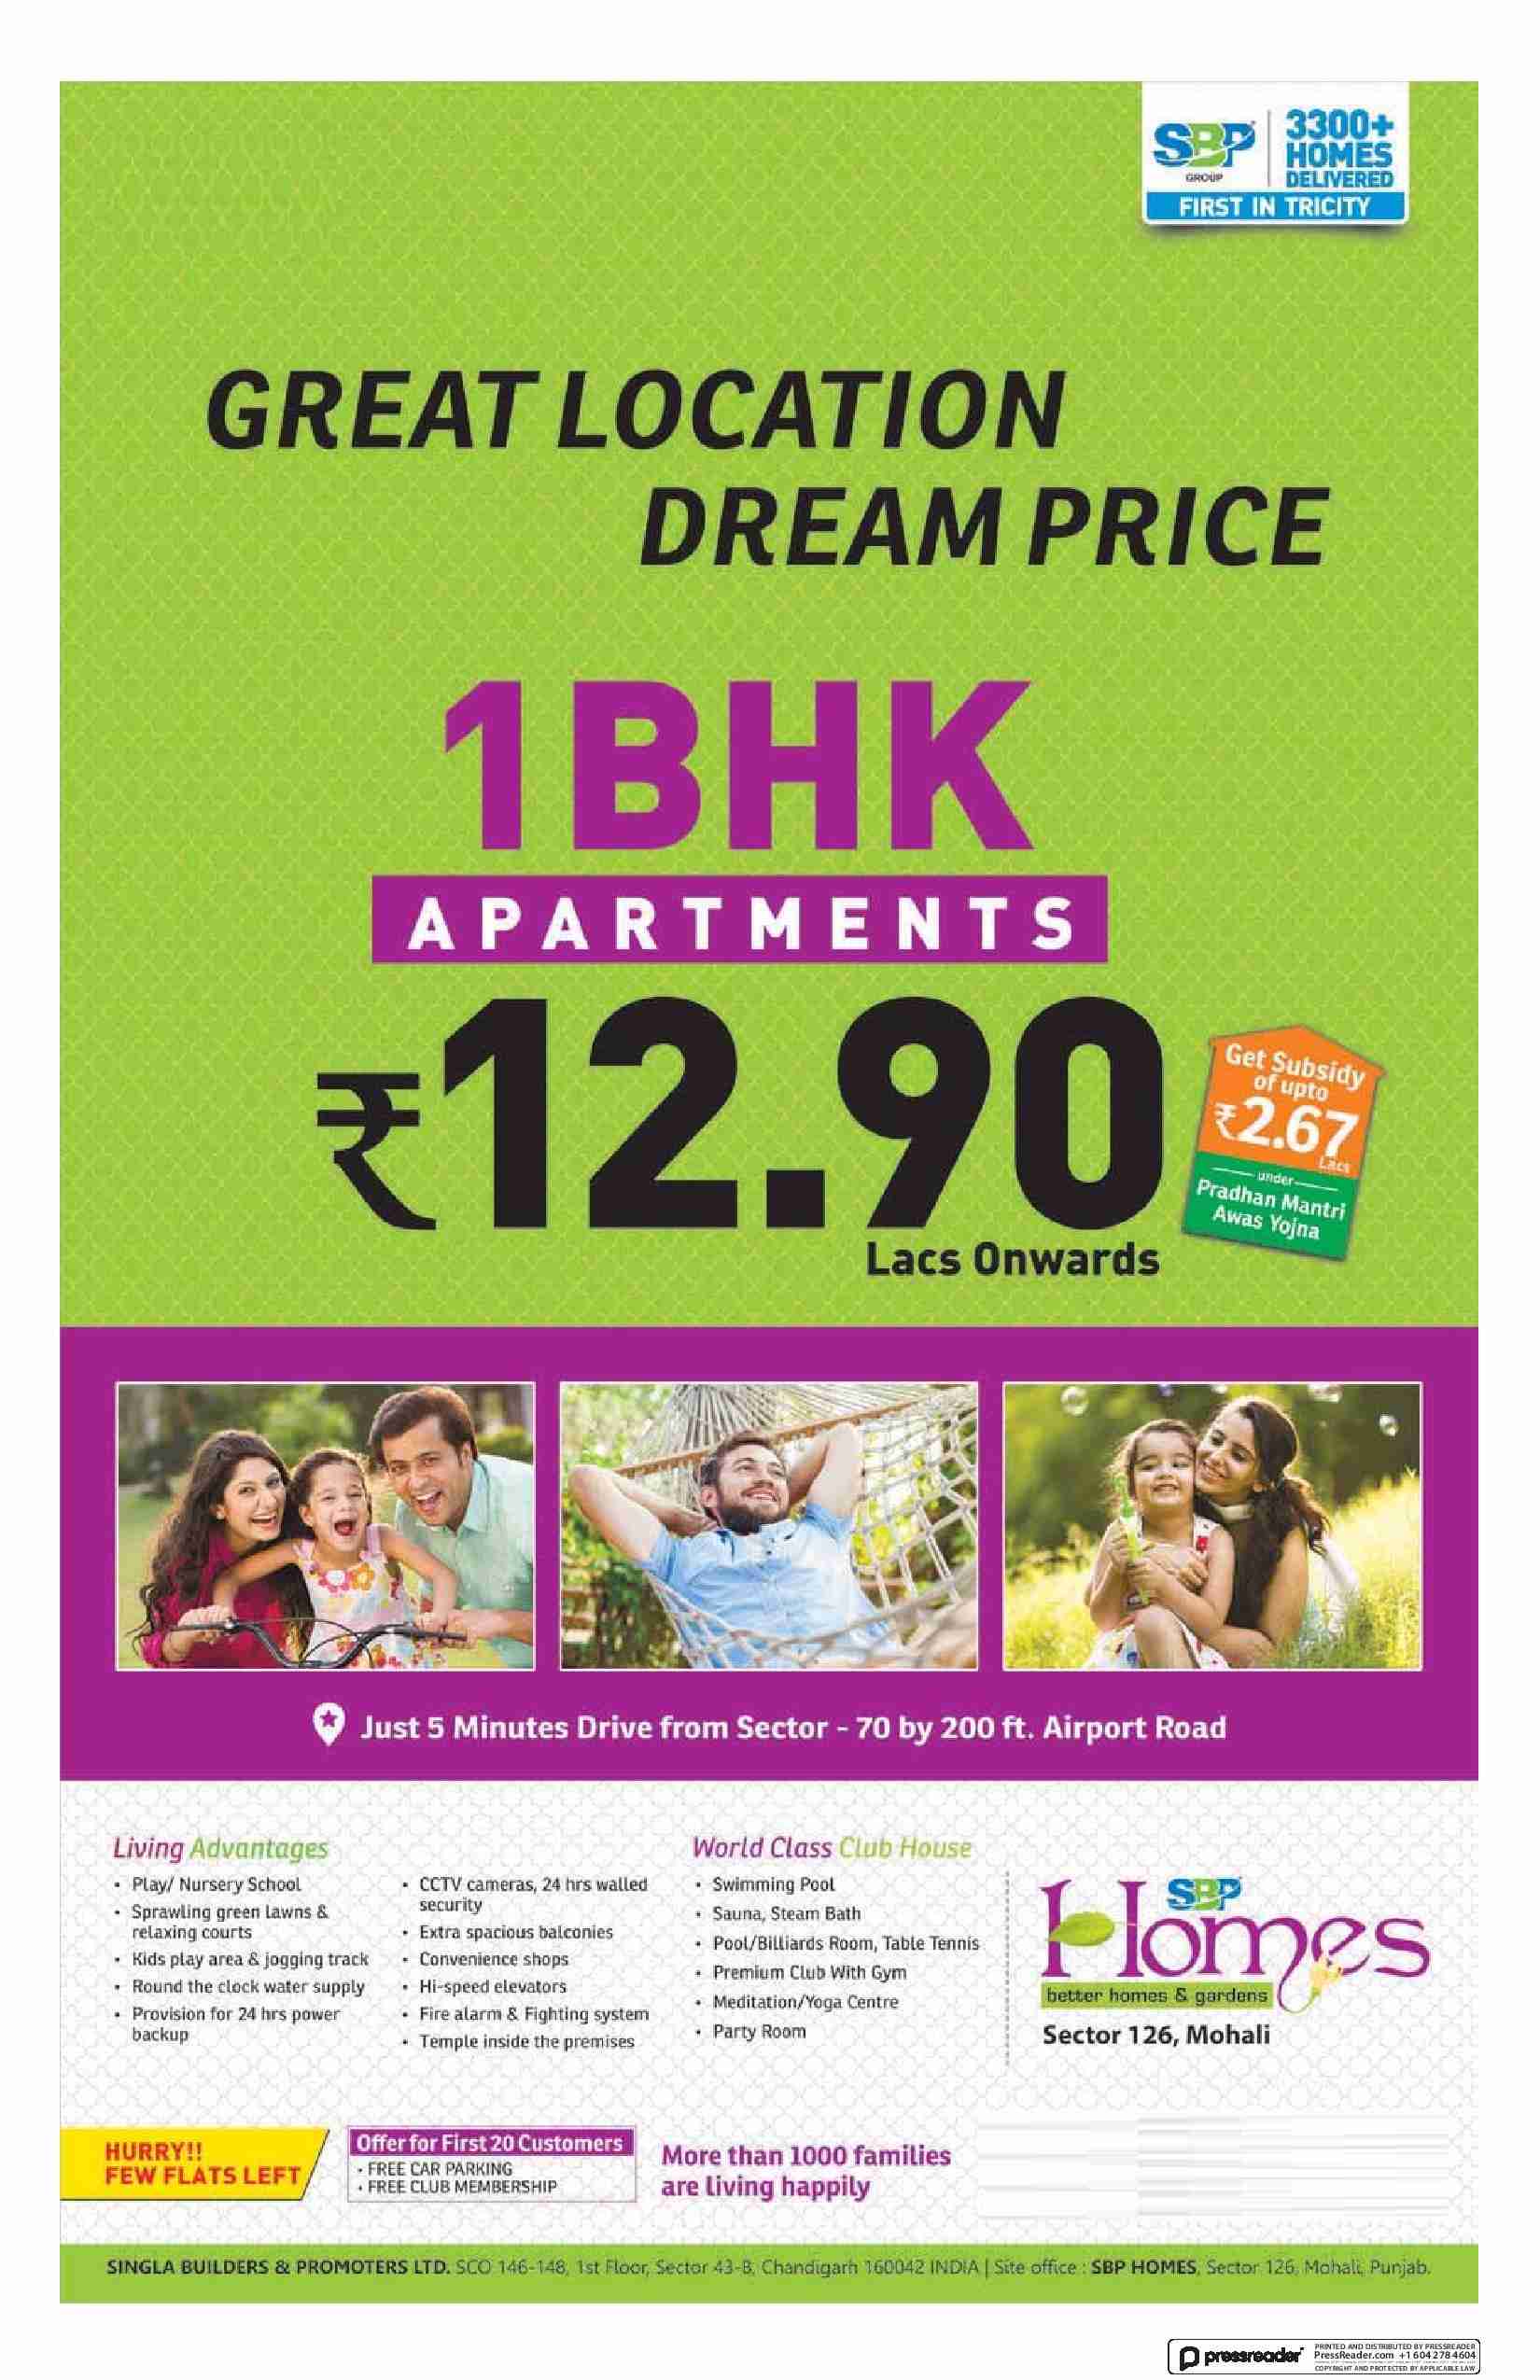 SBP Homes presents 1 BHK apartments with great location and dream price in Mohali